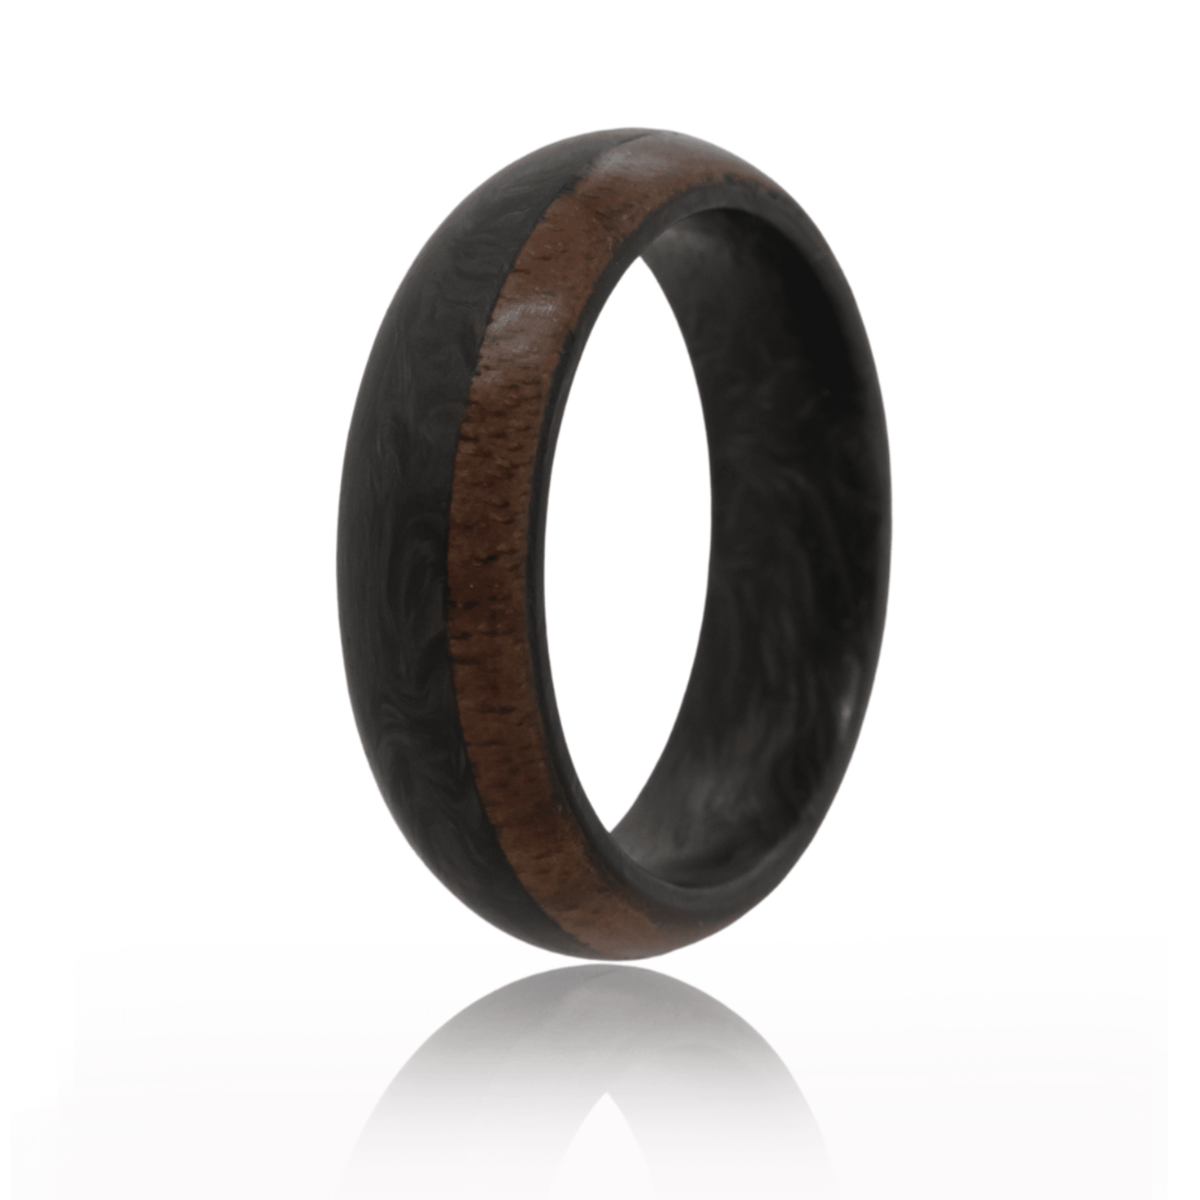 Forged Carbon Fiber ring with walnut wood rim.